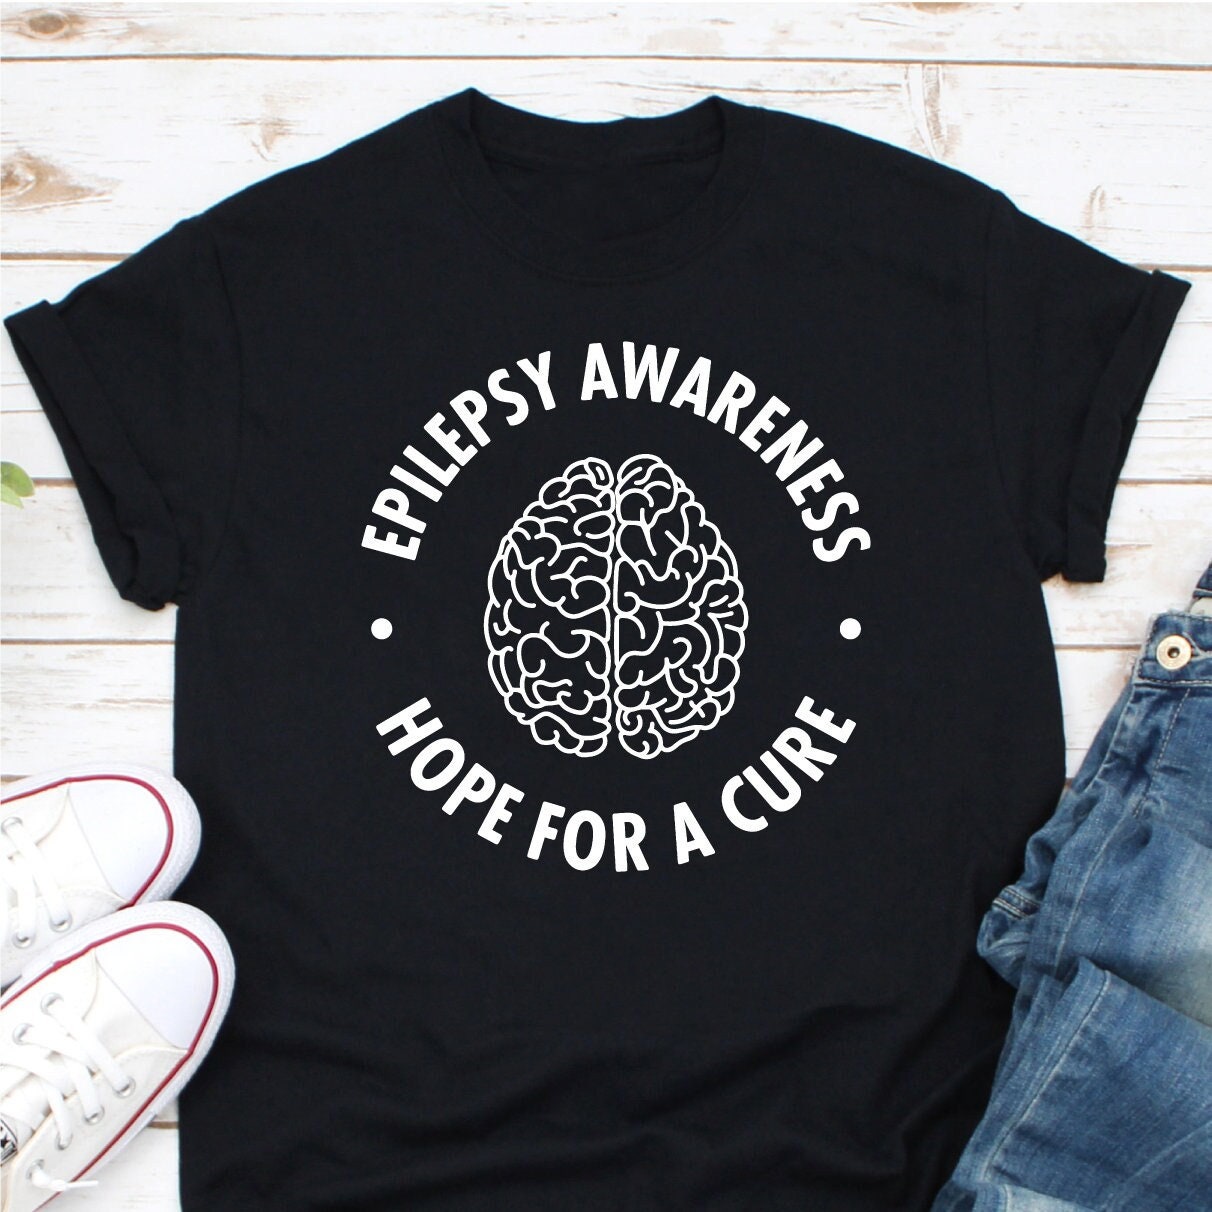 Epilepsy Awareness Hope For A Cure Shirt, Seizure Awareness, Epilepsy Support, Epilepsy November